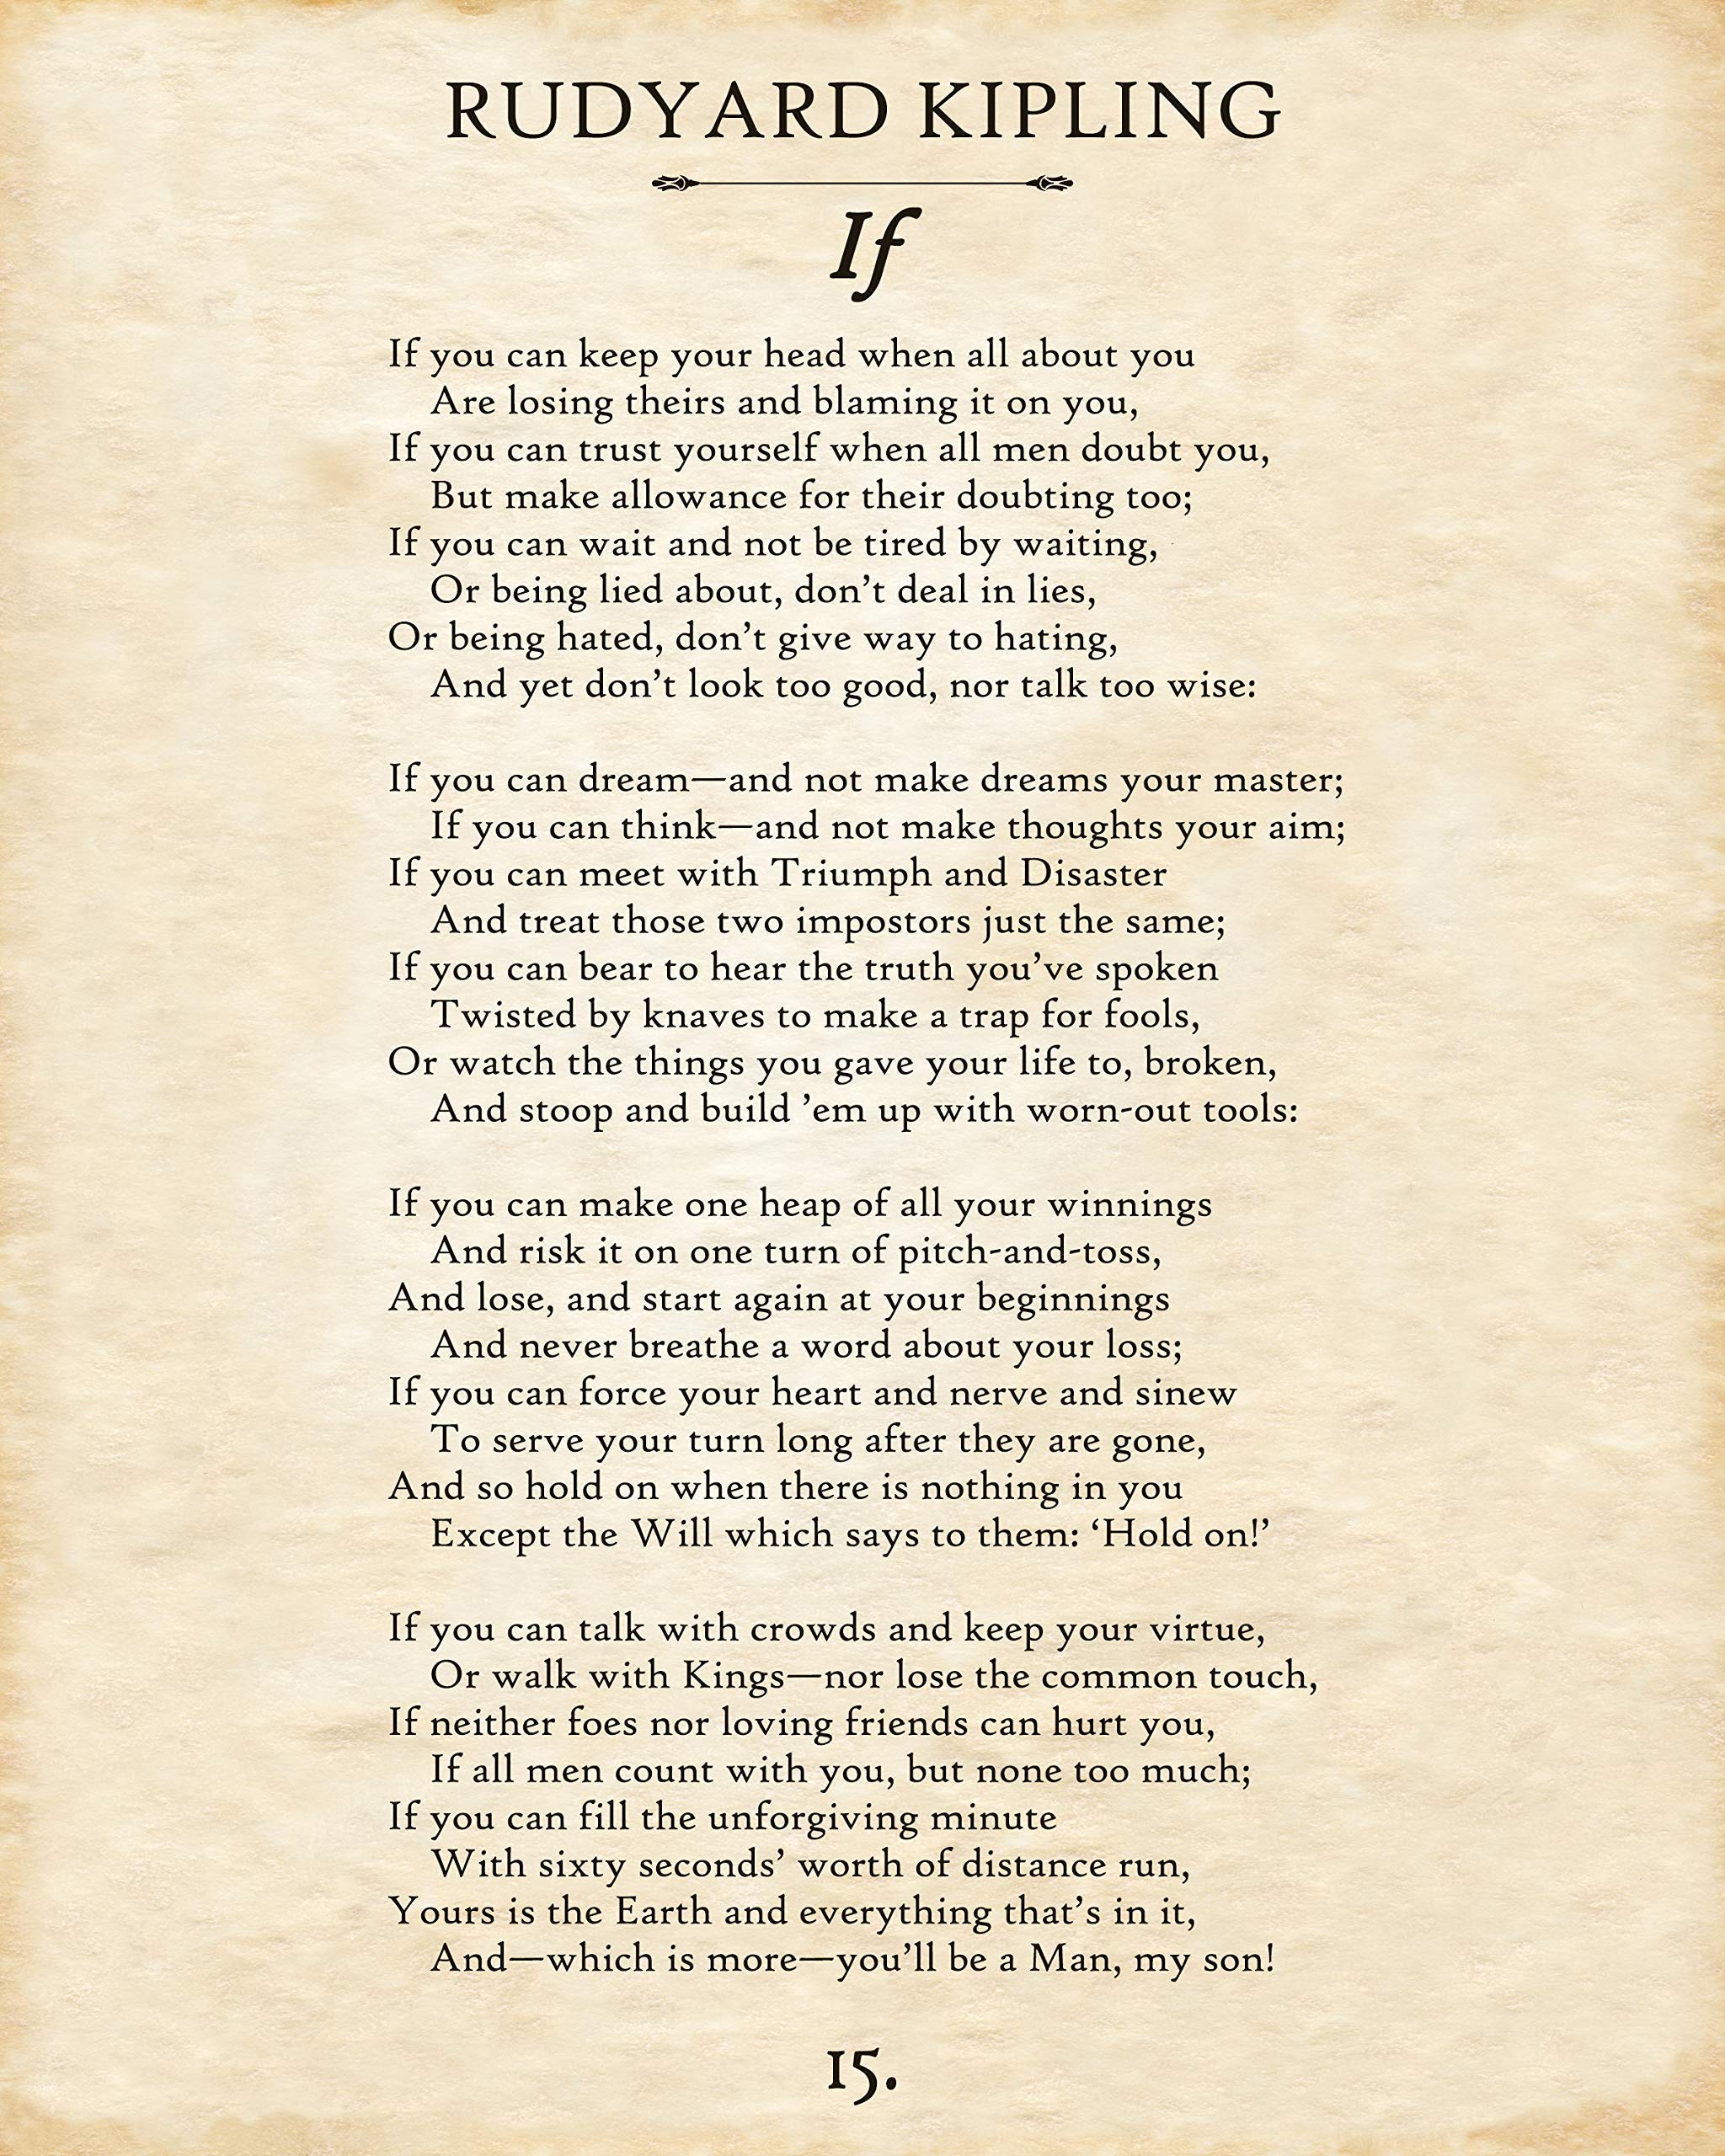 Rudyard Kipling - If - Inspirational Sayings Wall Decor, Motivational Poem Poster, Canvas Wall Art for Home and Office, Inspiring Literature Gift, Choose Unframed Book Poster Poster or Canvas Arts